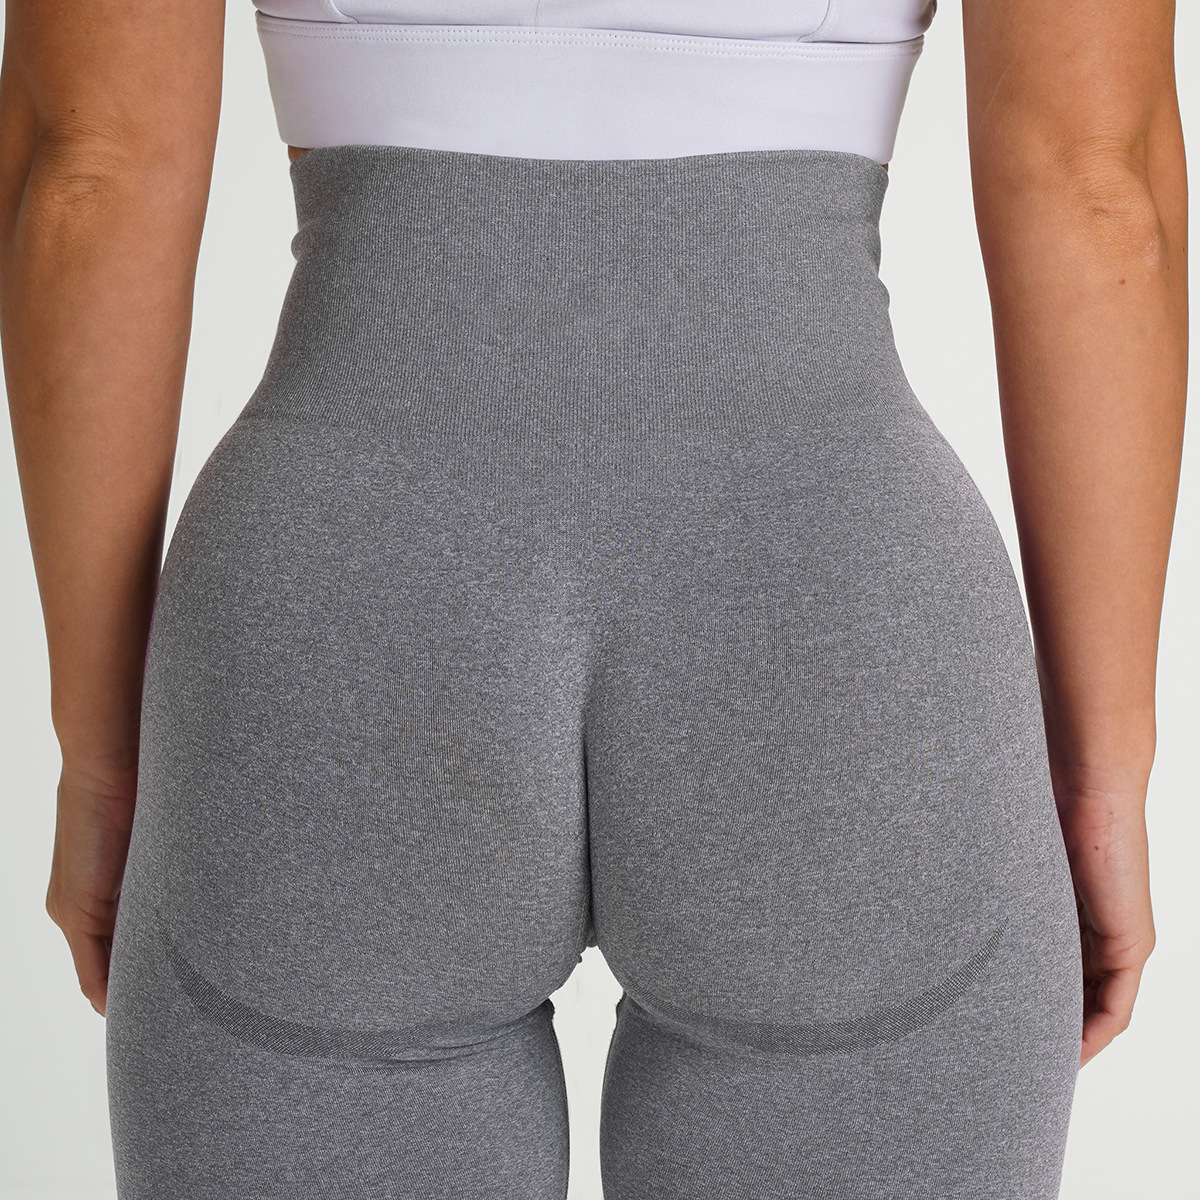 High Waist Yoga Pants Legging with Pattern Design Featured Image